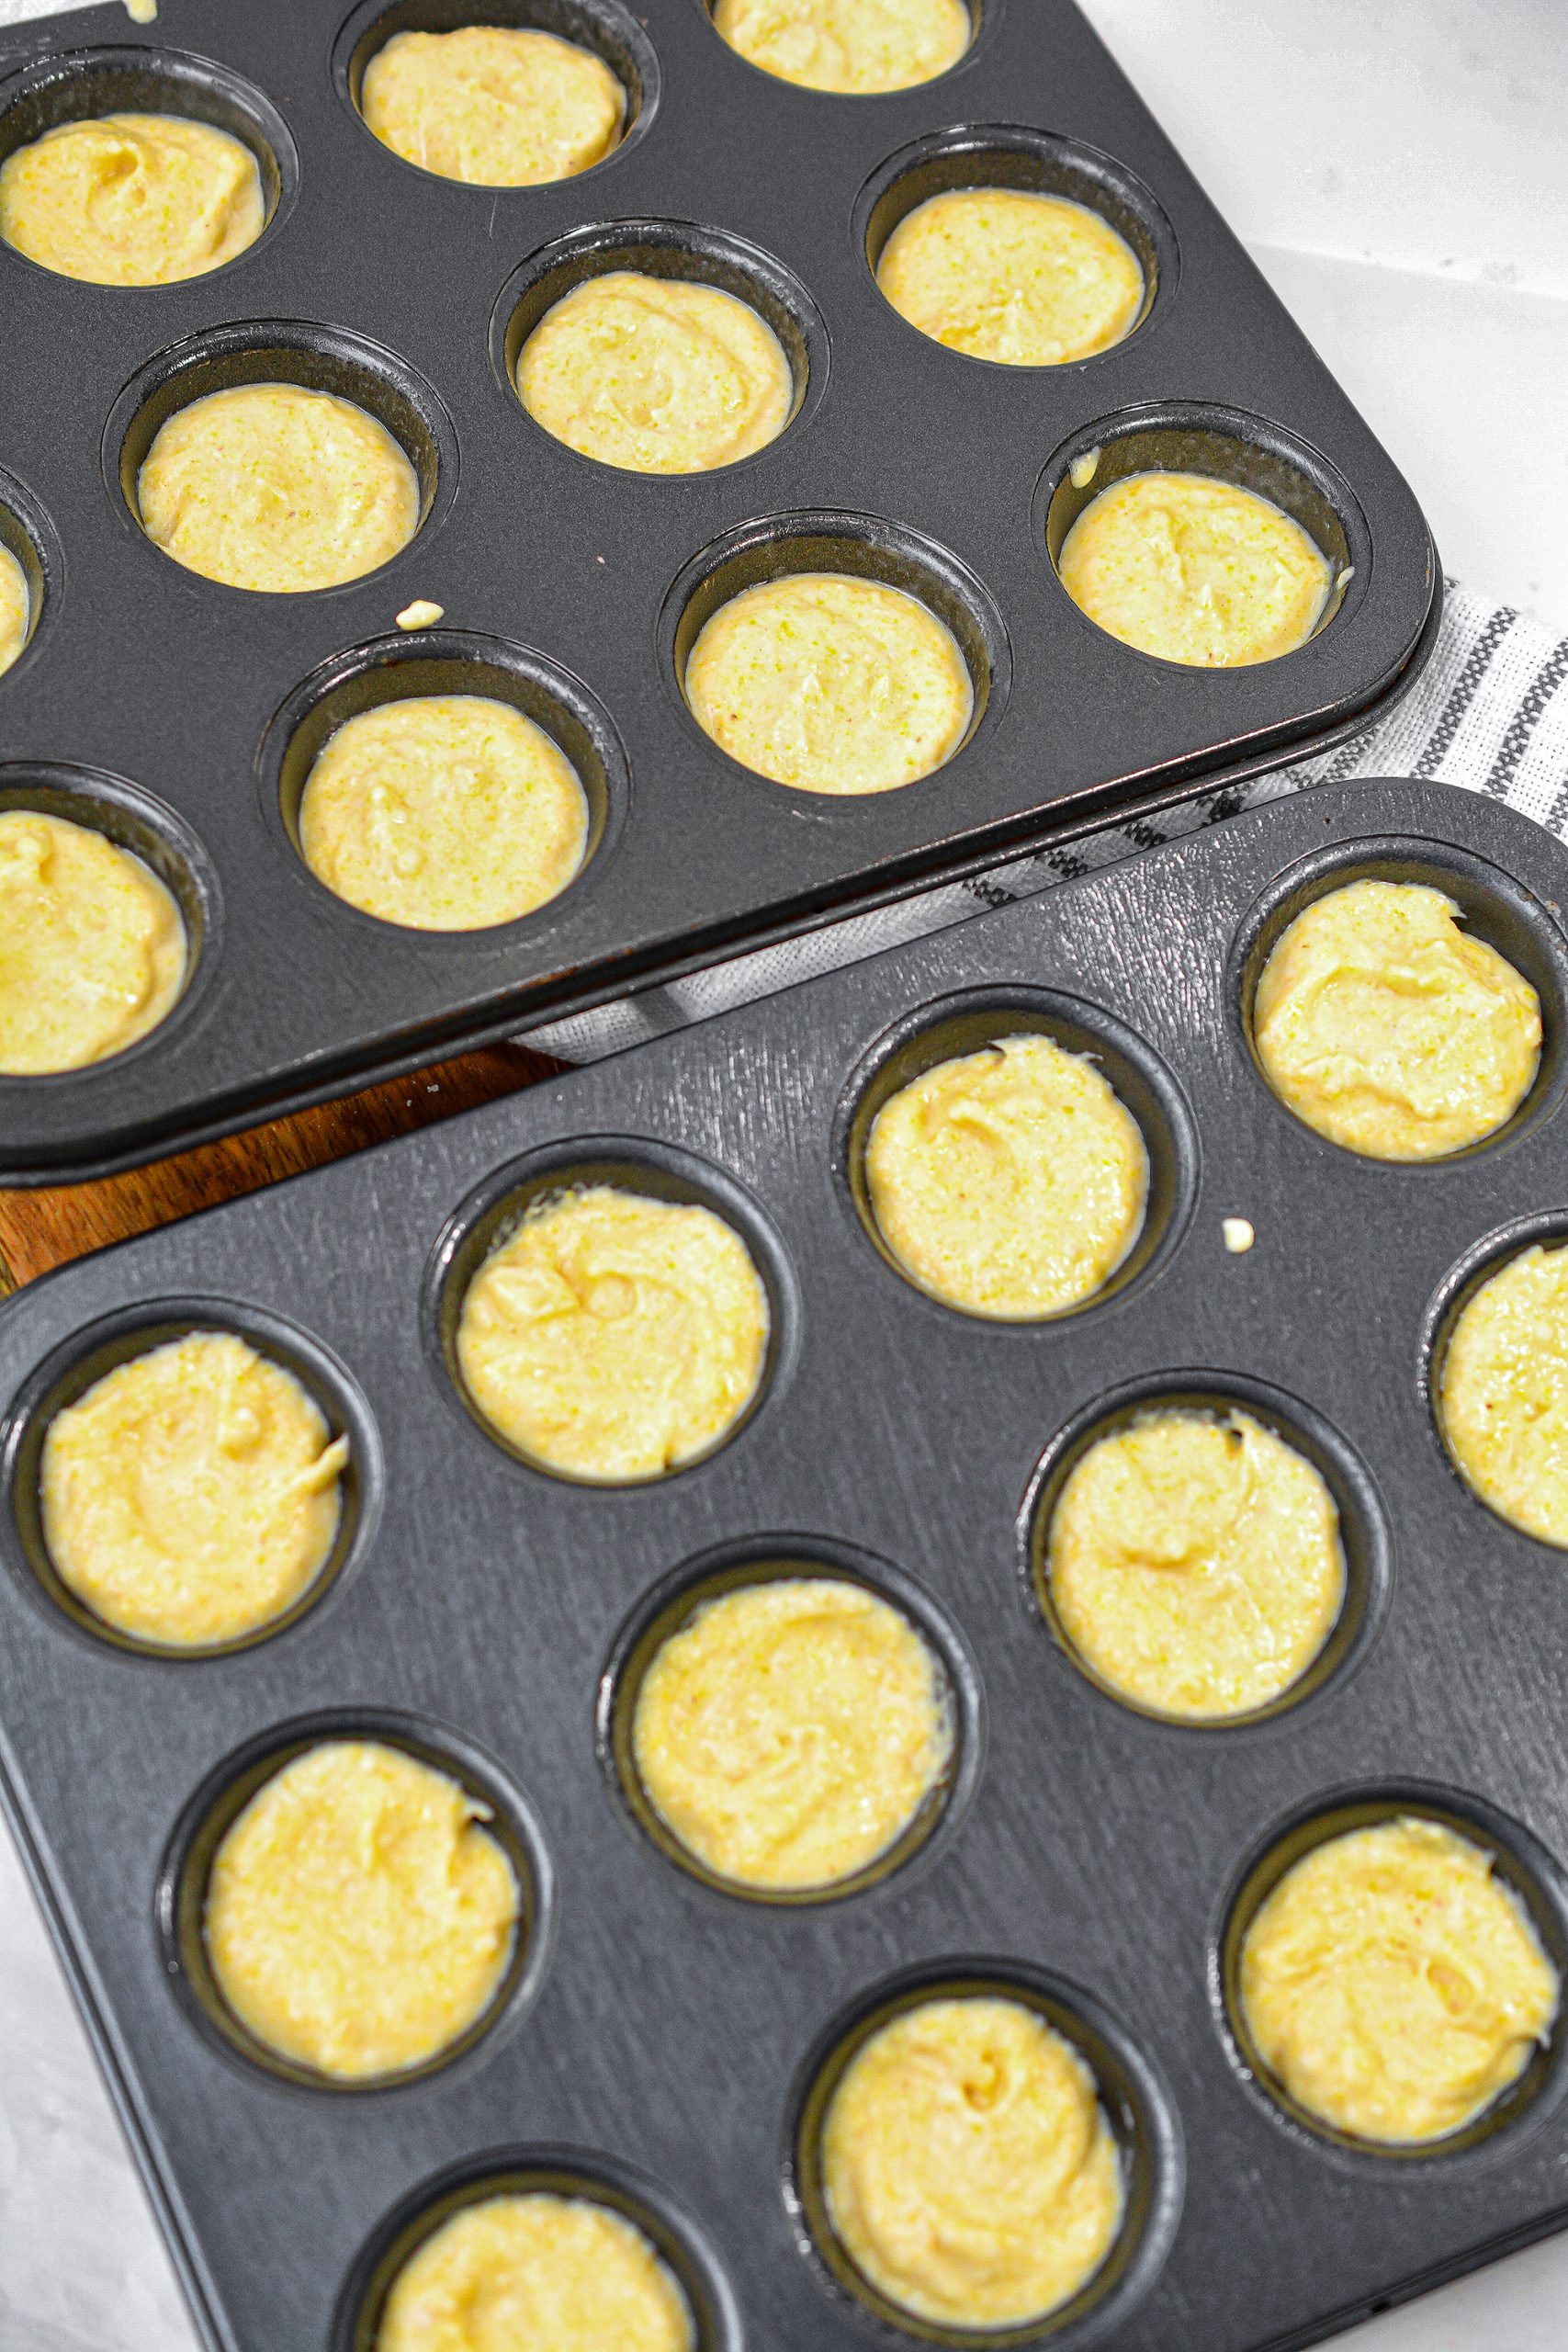  Spoon the batter into the sections of well greased mini muffin tins, filling them about ¾ of the way full.